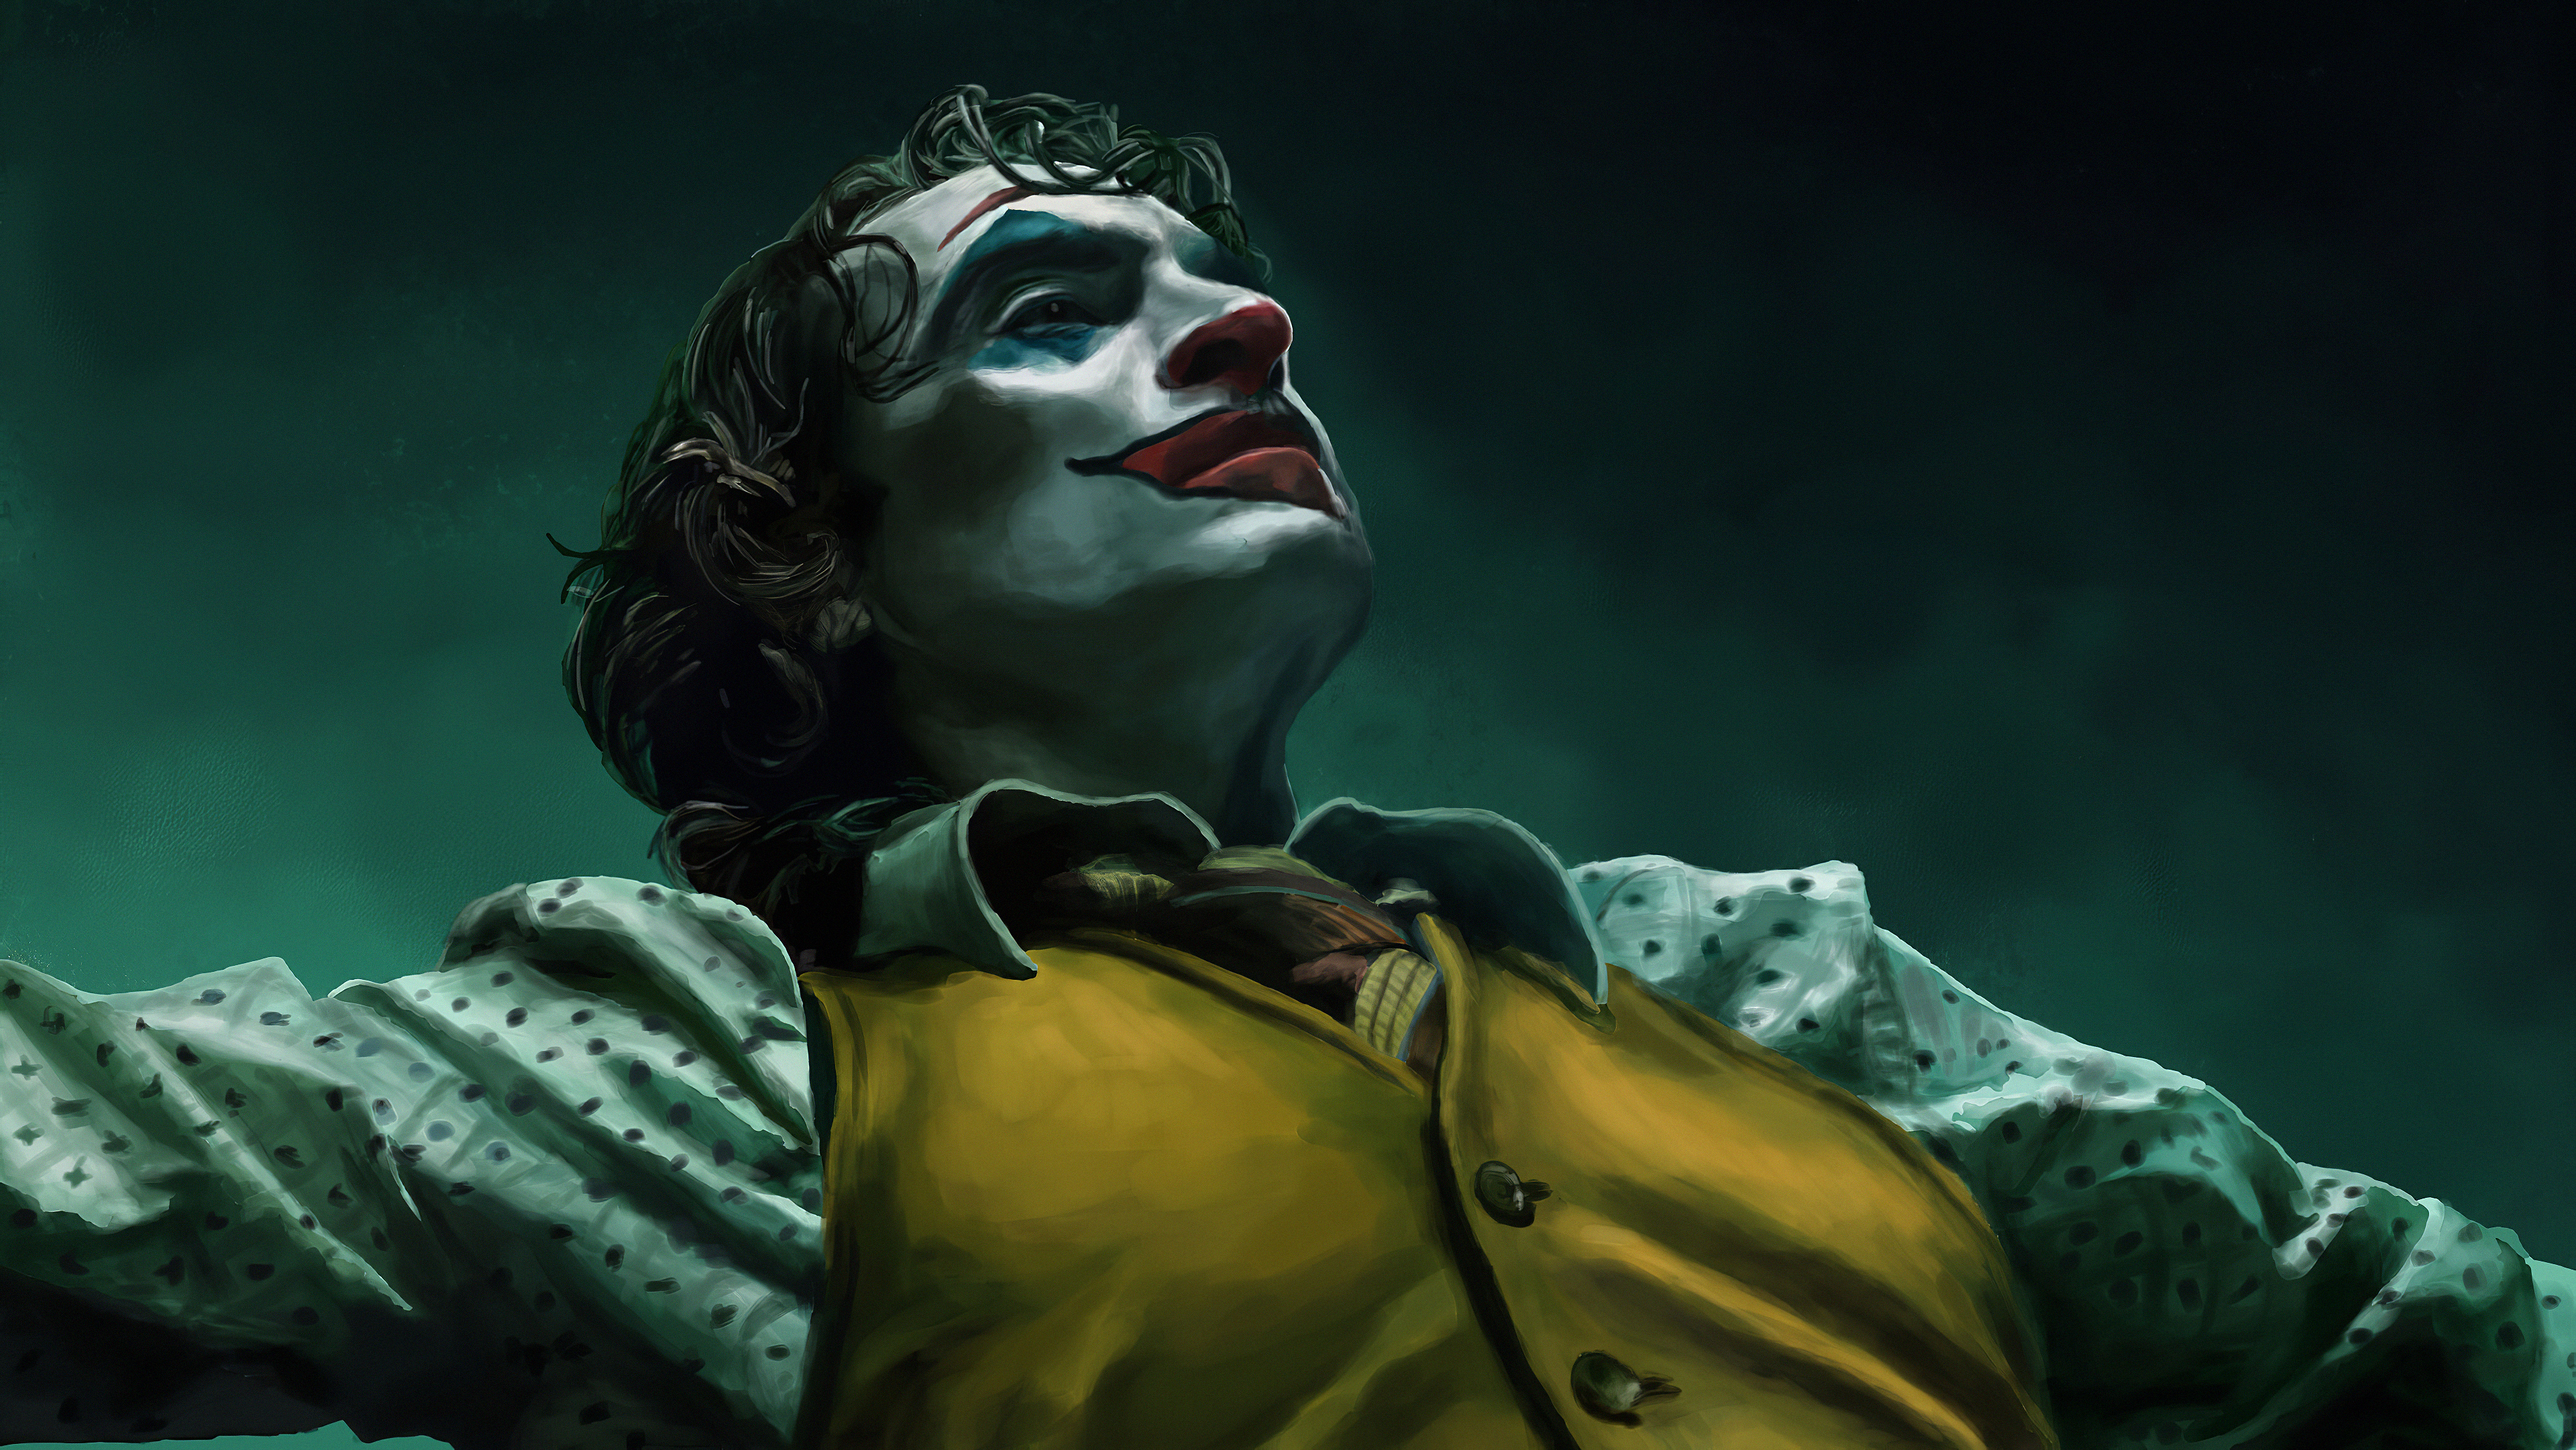 Joker 4k 2020 Hd Superheroes 4k Wallpapers Images Backgrounds Photos And Pictures